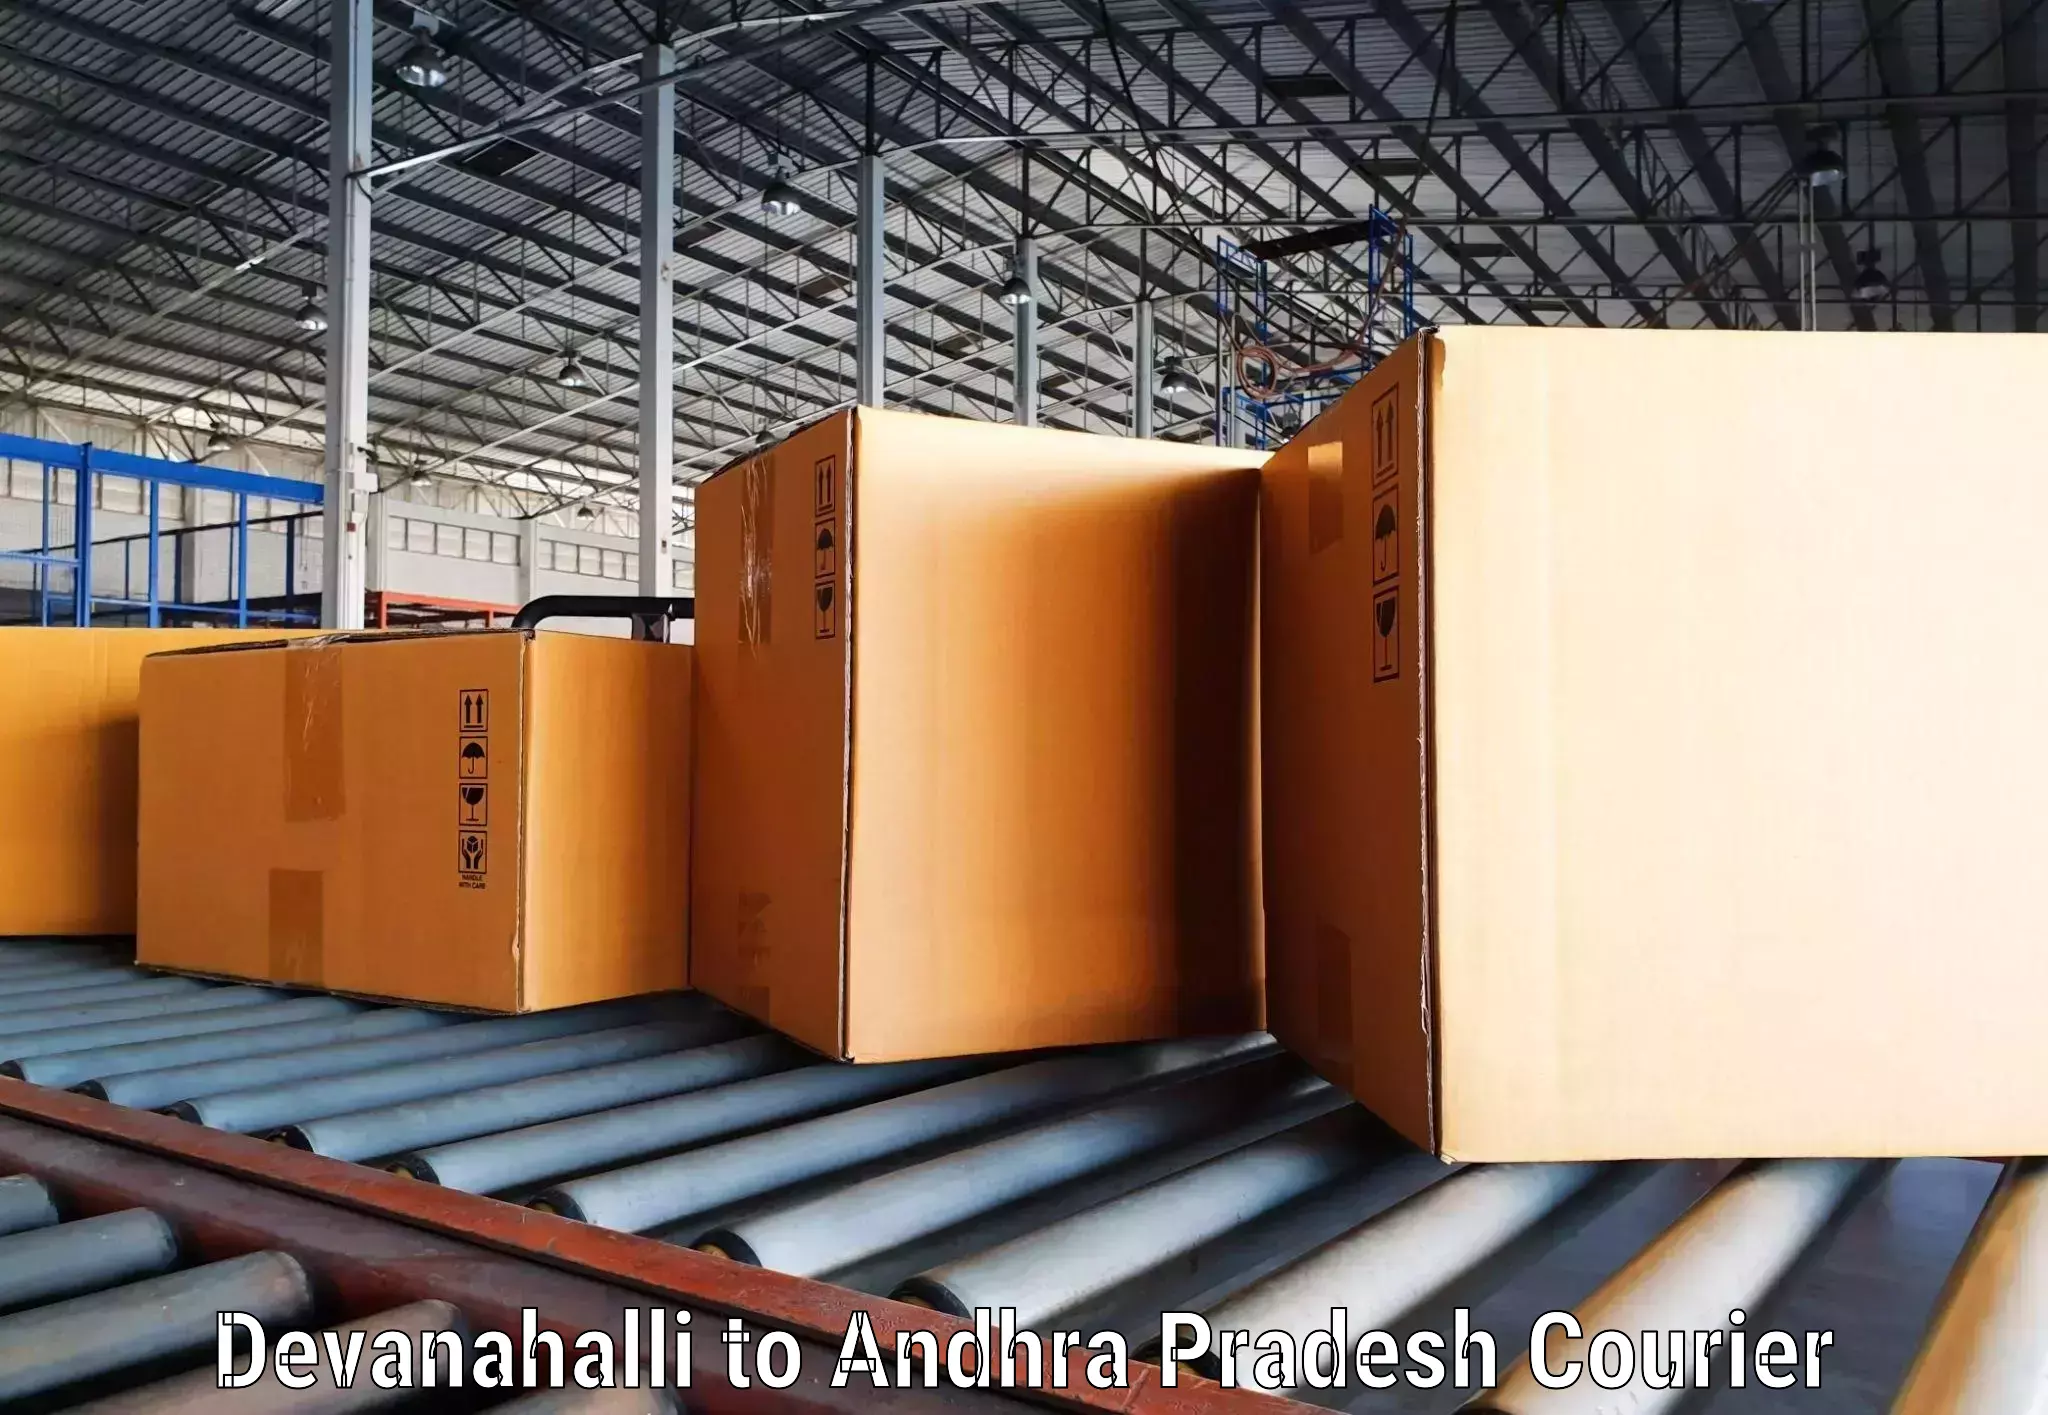 State-of-the-art courier technology Devanahalli to Visakhapatnam Port